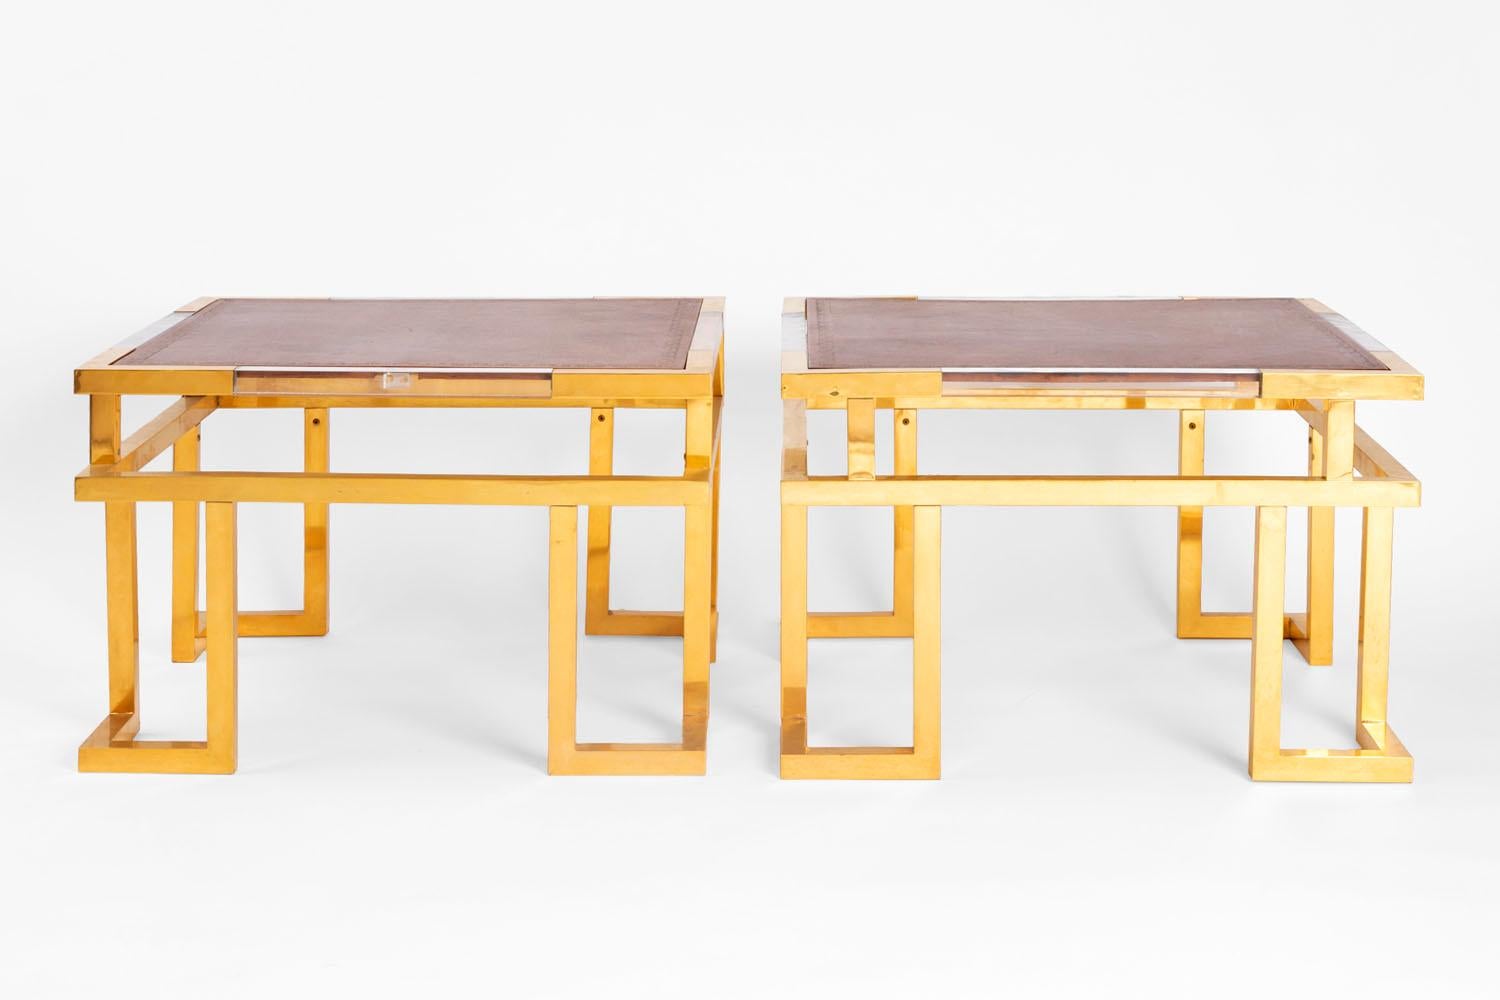 Other Guy Lefevre, Pair of Giltbrass, Plexiglas and Leather End Tables, circa 1970